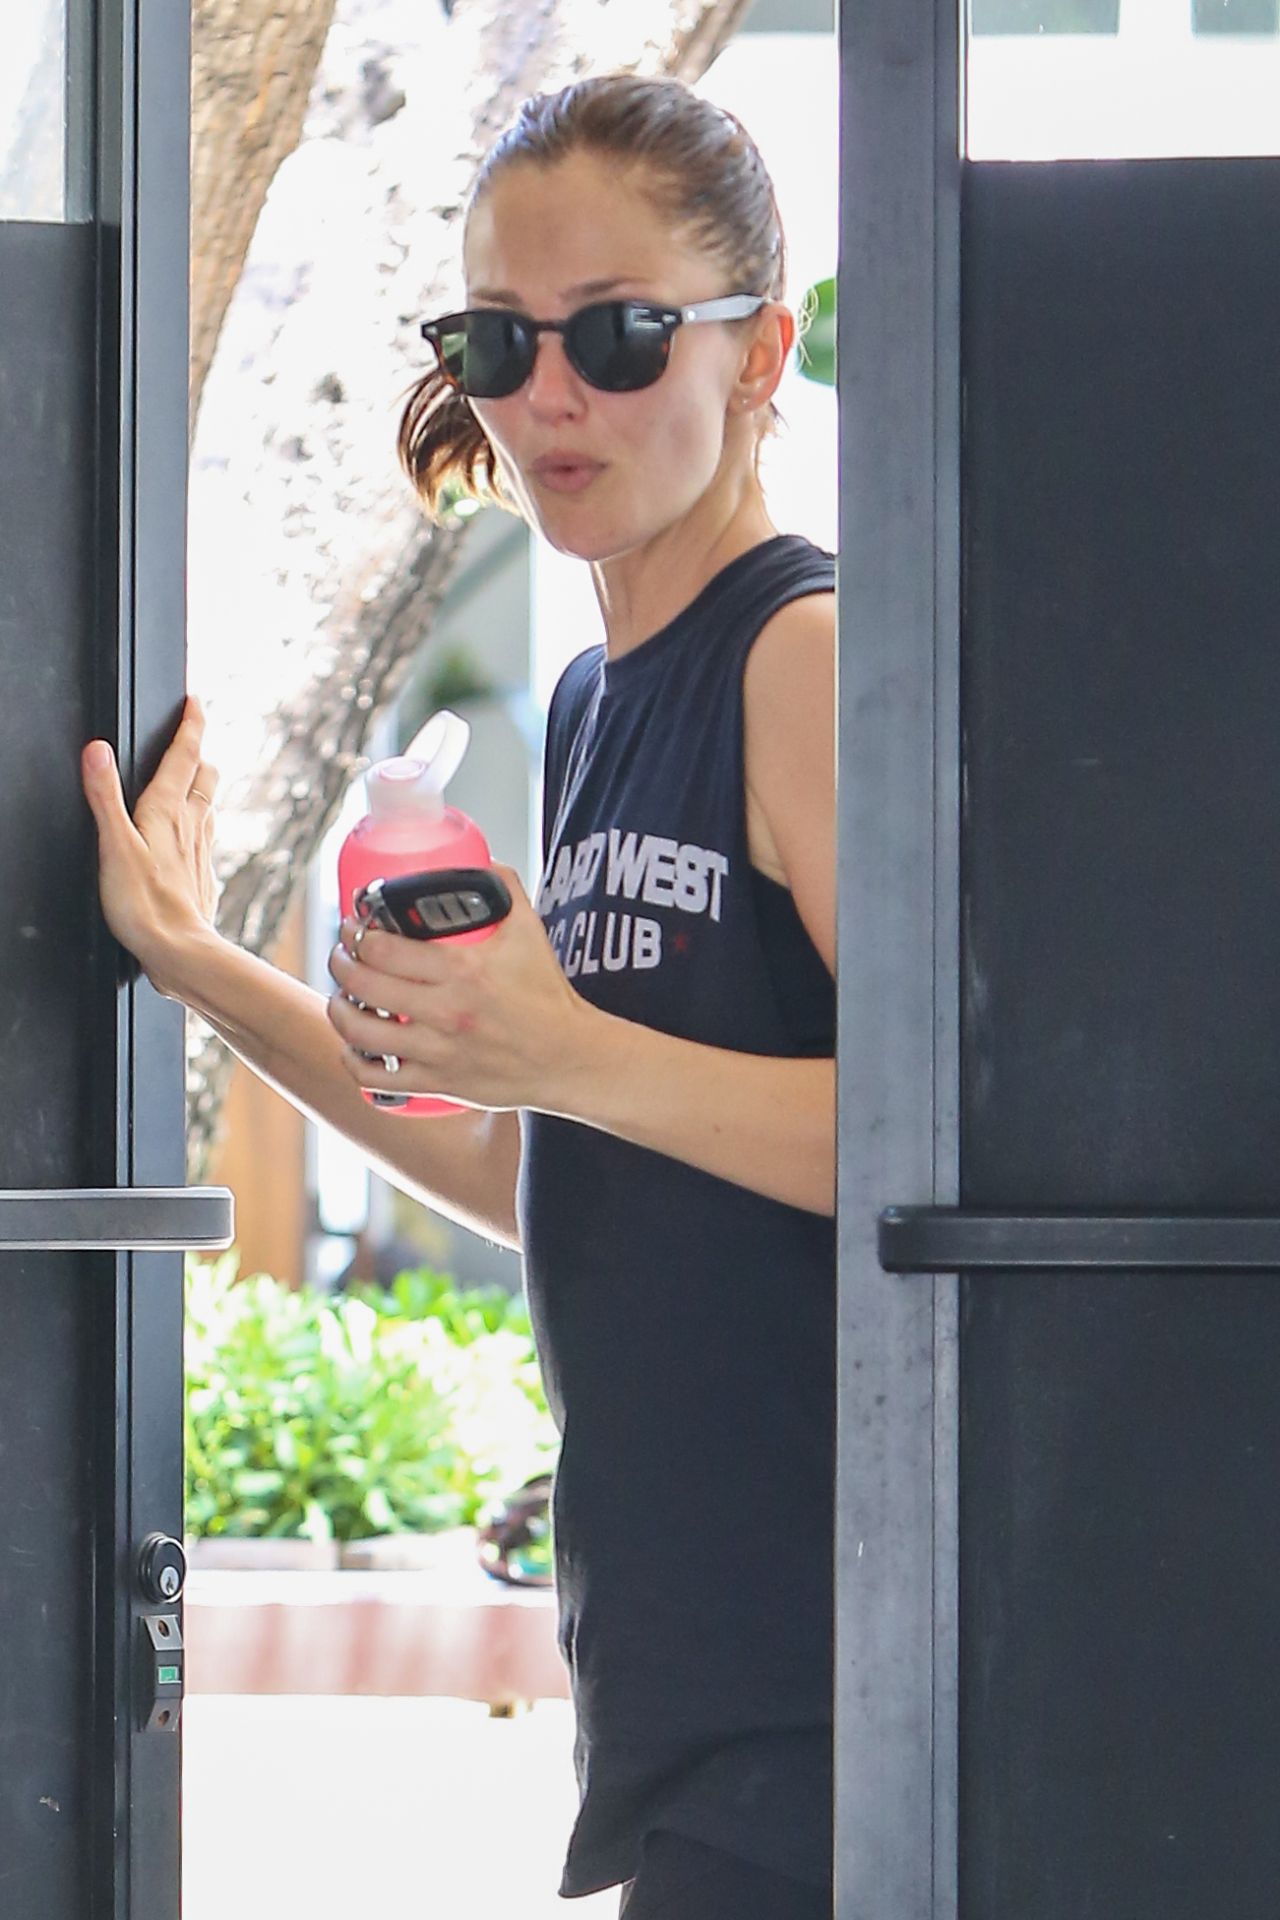 Minka Kelly - Leaving a Gym in West Hollywood - August 2014